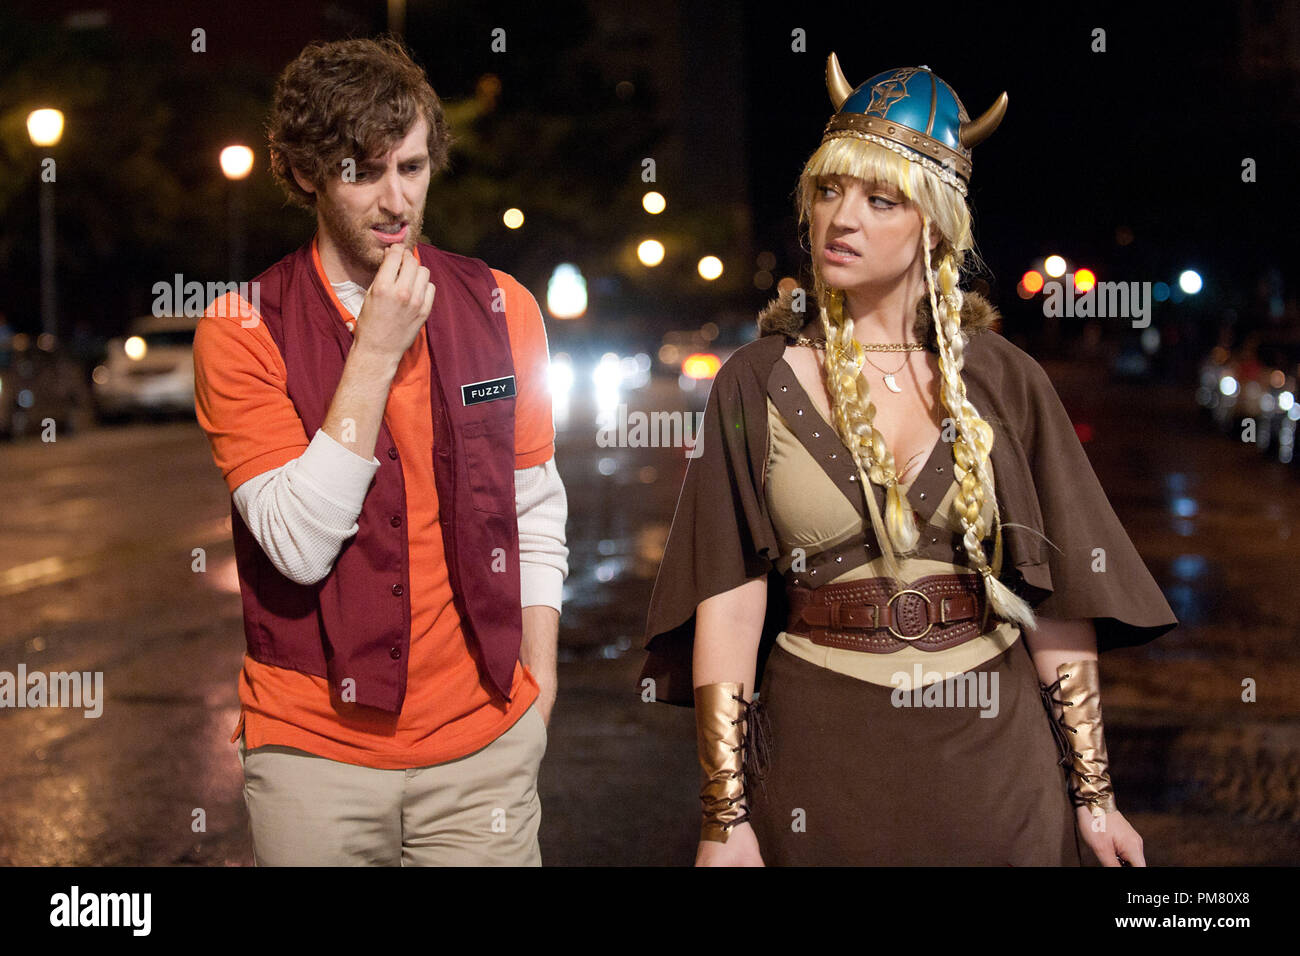 (Left to right) Thomas Middleditch as Fuzzy and Abbie Elliott as Lara in FUN SIZE from Paramount Pictures. Stock Photo